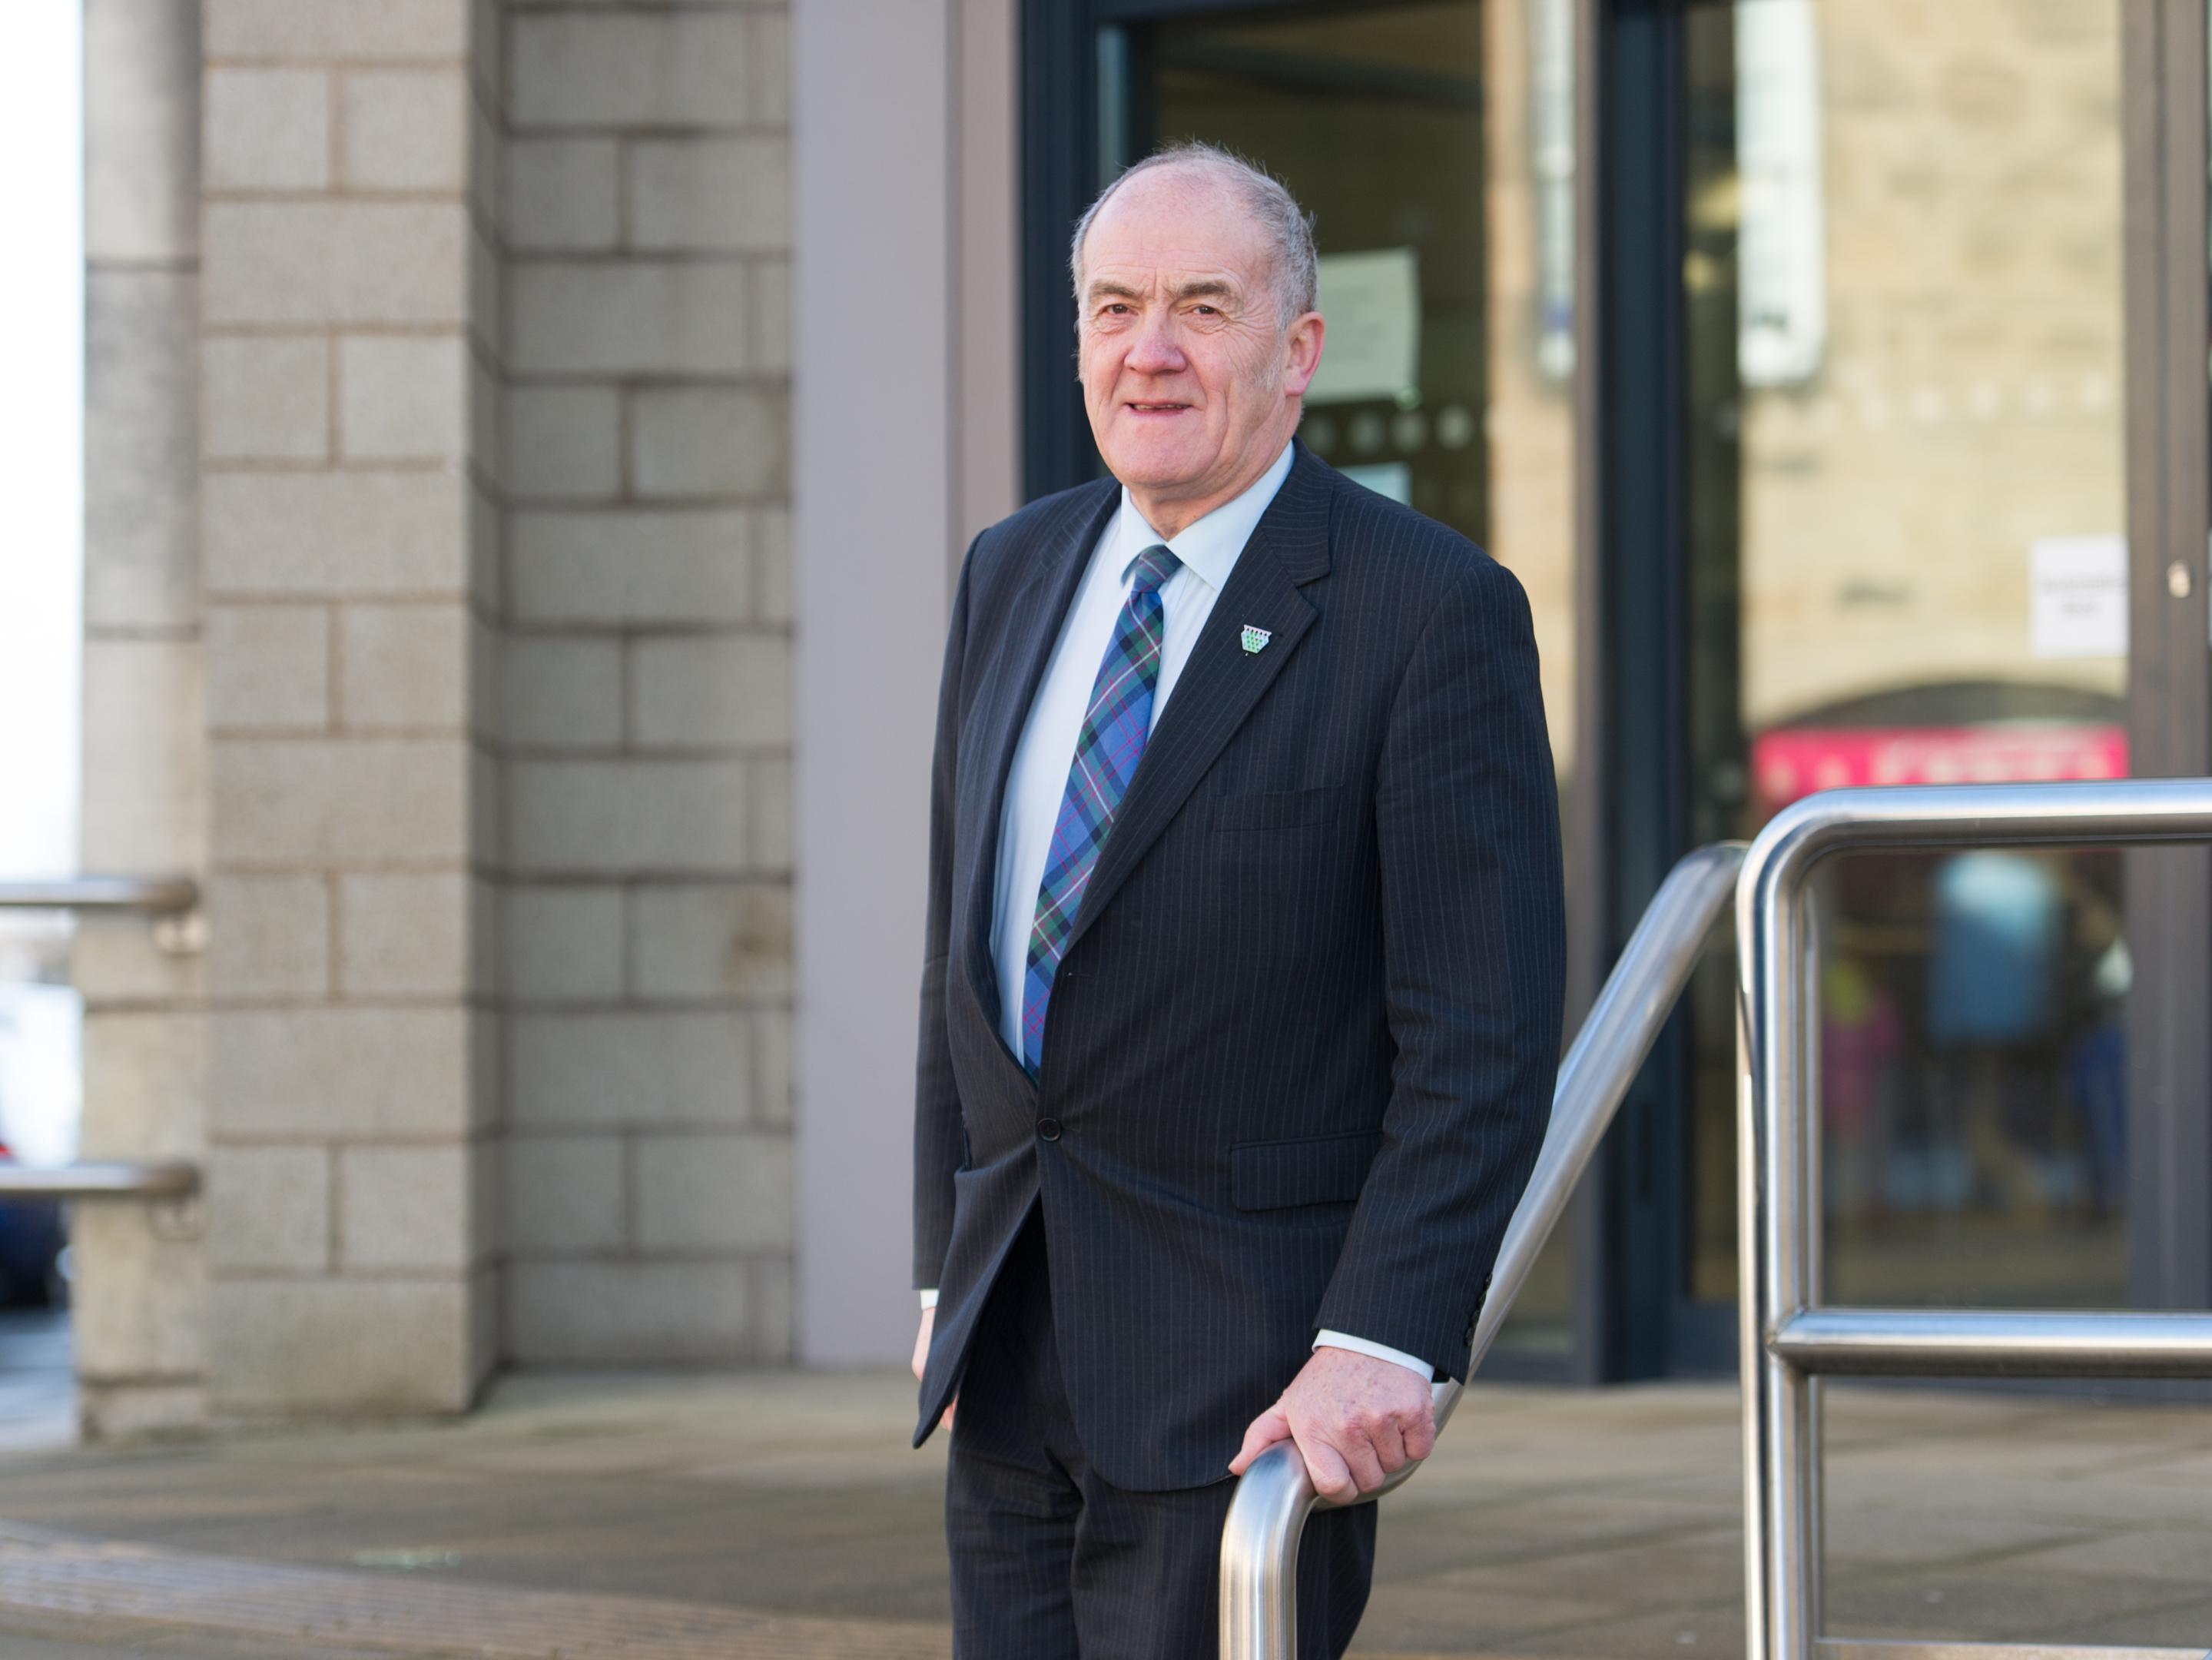 Forres councillor George Alexander has praised the work done by staff.